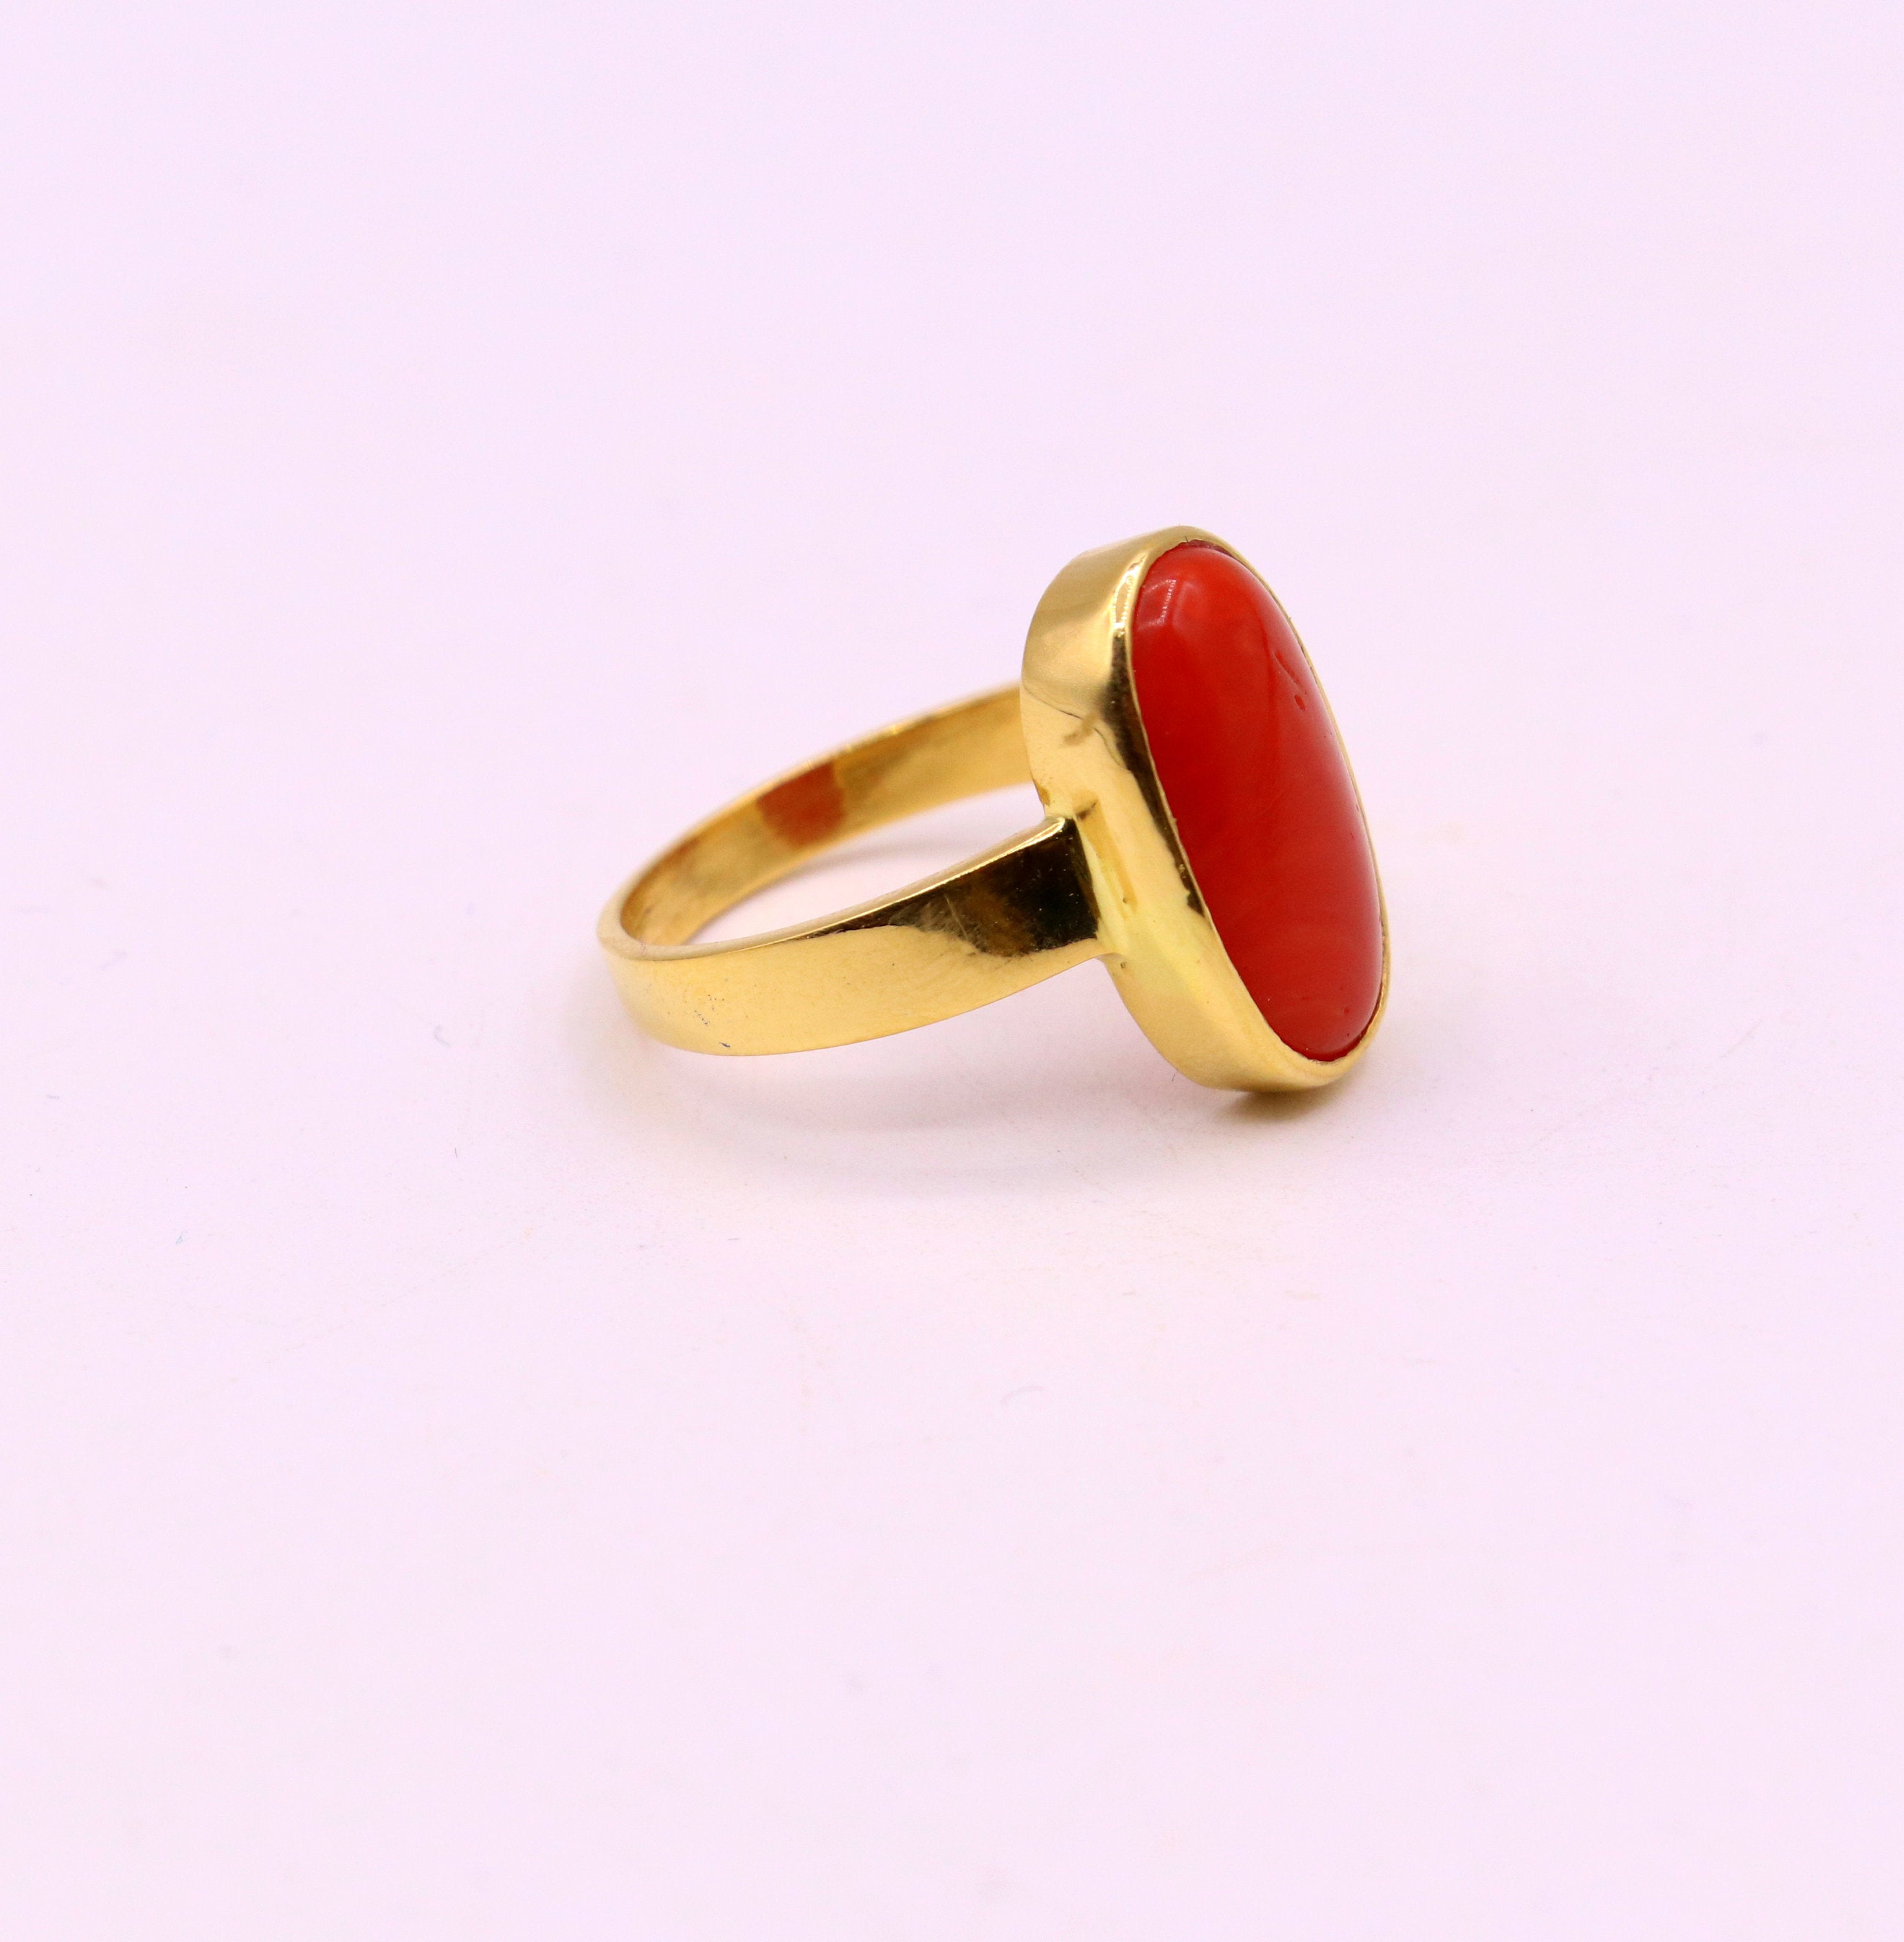 Amazon.com: Natural Rare 14 Carat Australian Big Red Coral Mens Plain Heavy  Ring Sterling Silver 925 Handmade Marjan Ring Gift for Him Religious Ring  (15.75) : Handmade Products